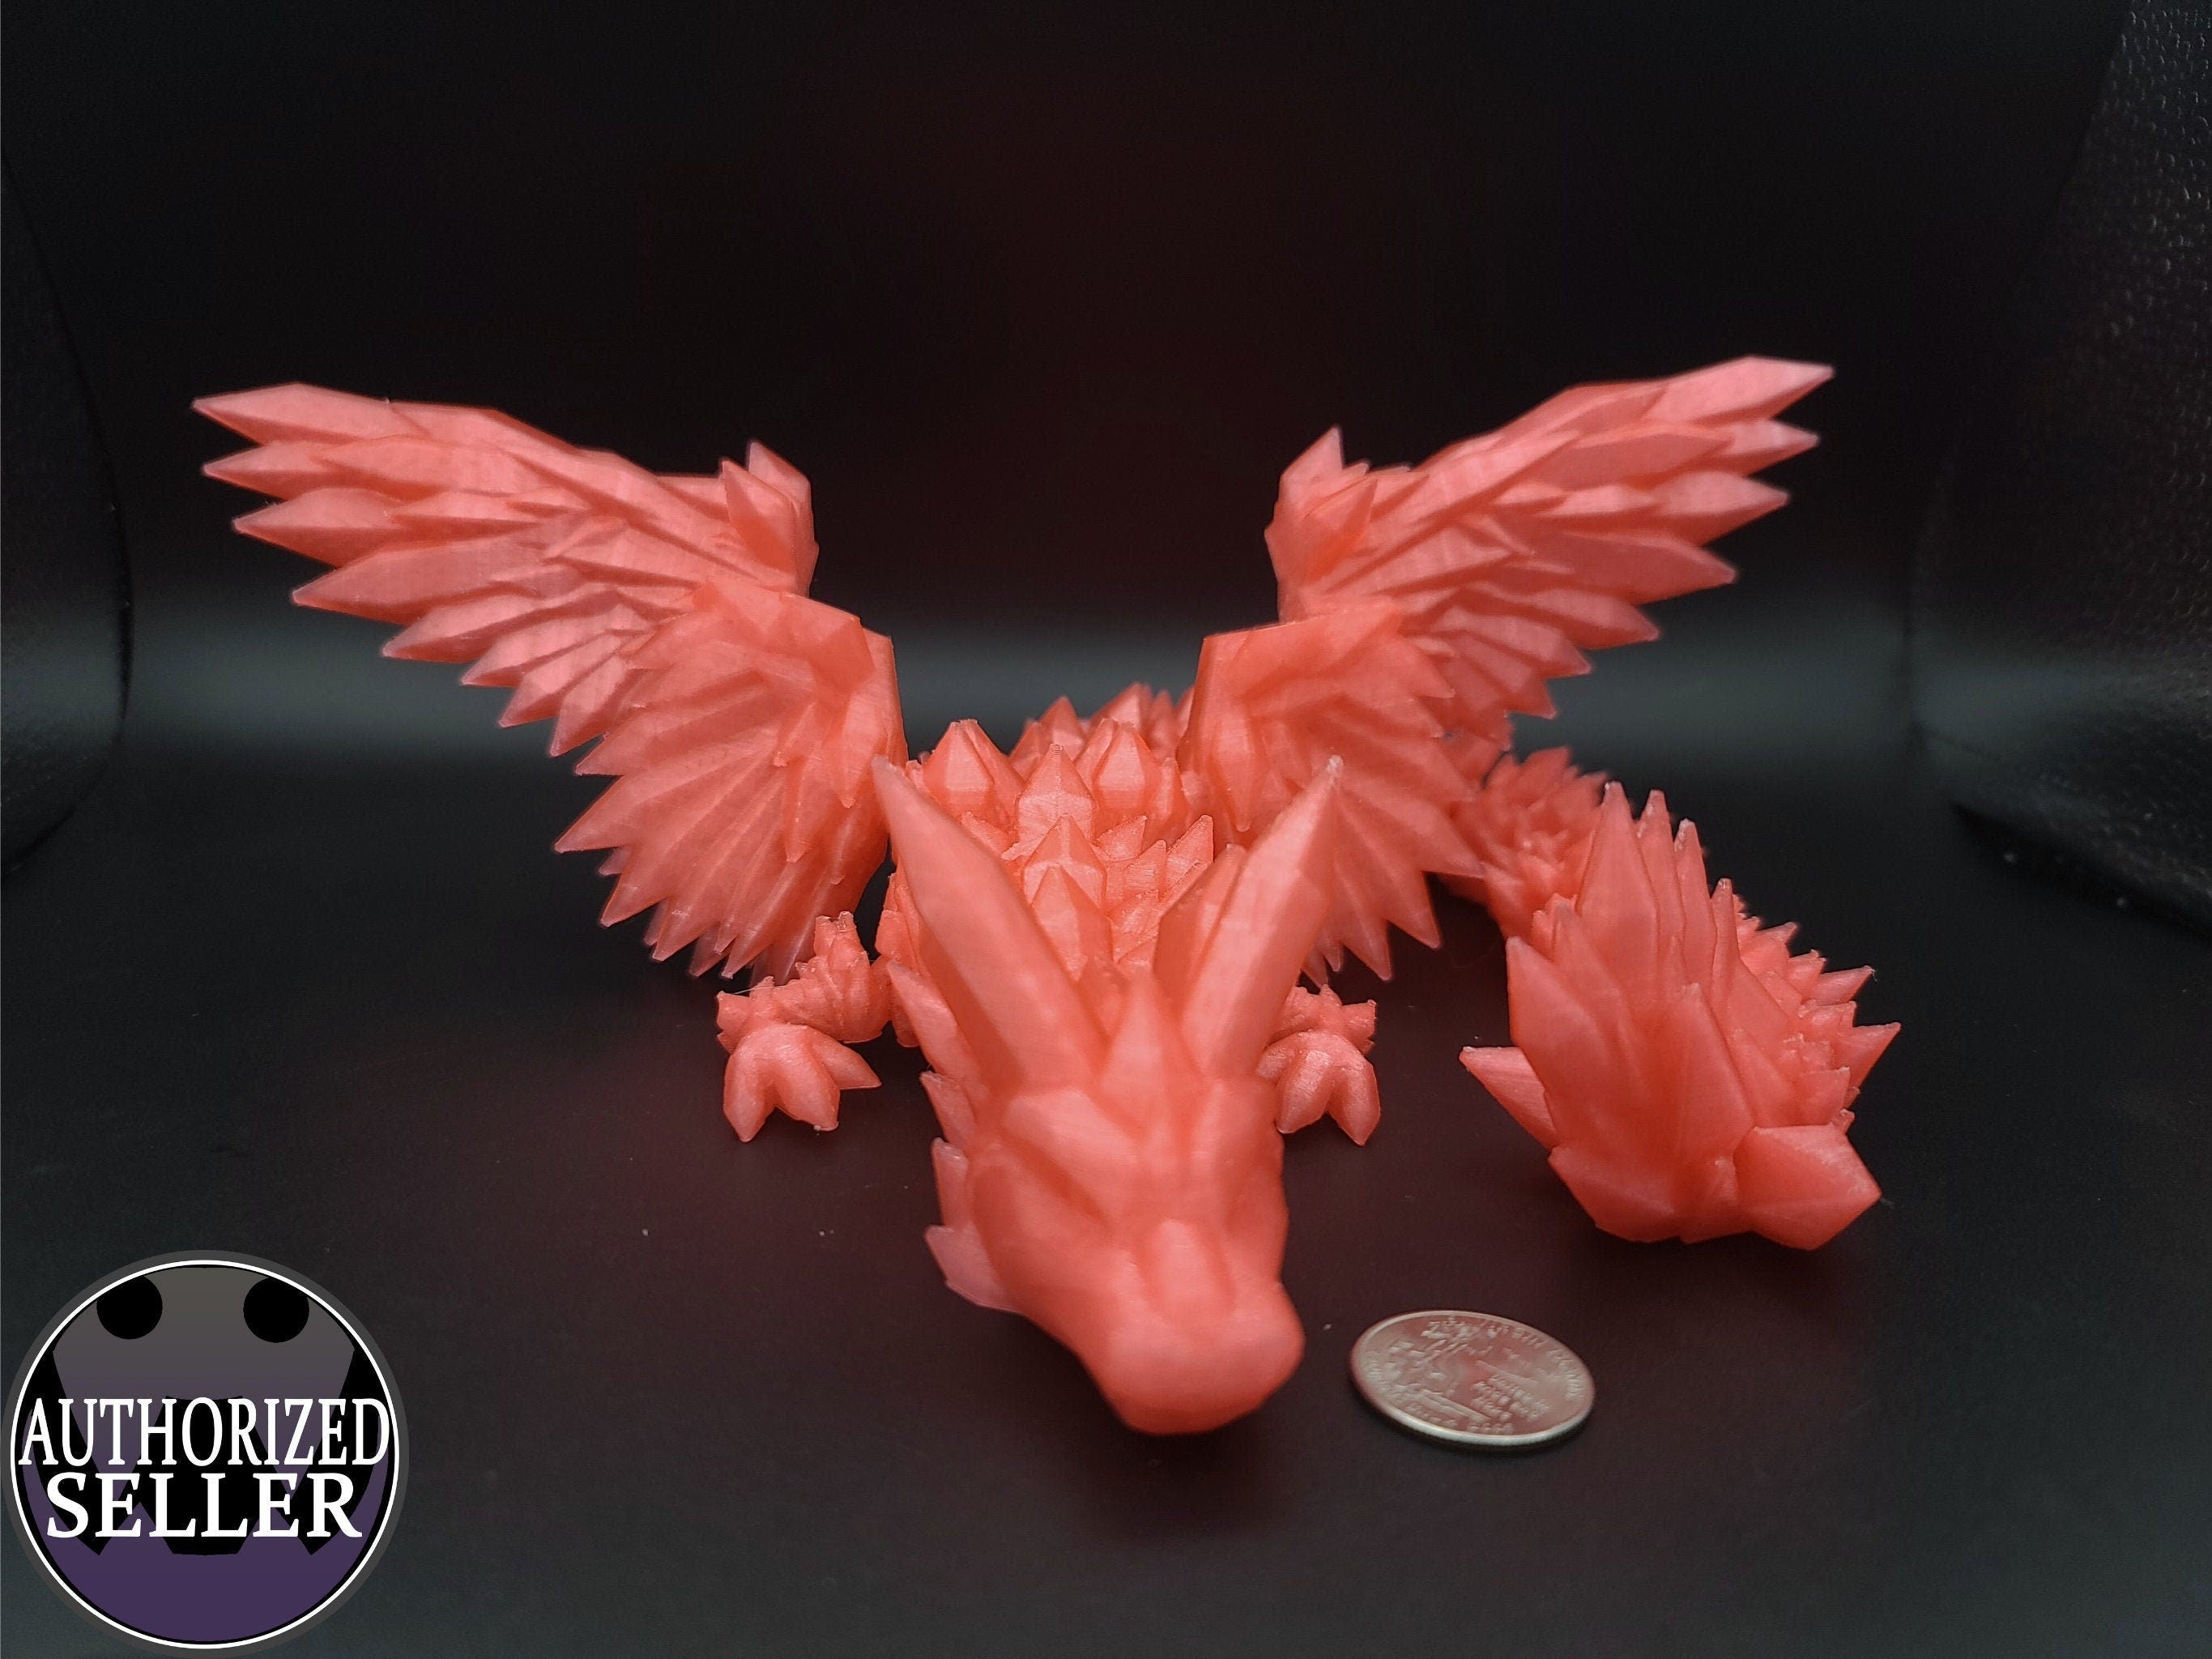 Watermelon Red Crystal Winged Dragon. Crystal Winged Dragon 3D printed articulating dragon Fidget, Flexi, Toy 18 in. Stress Relief, Gift.